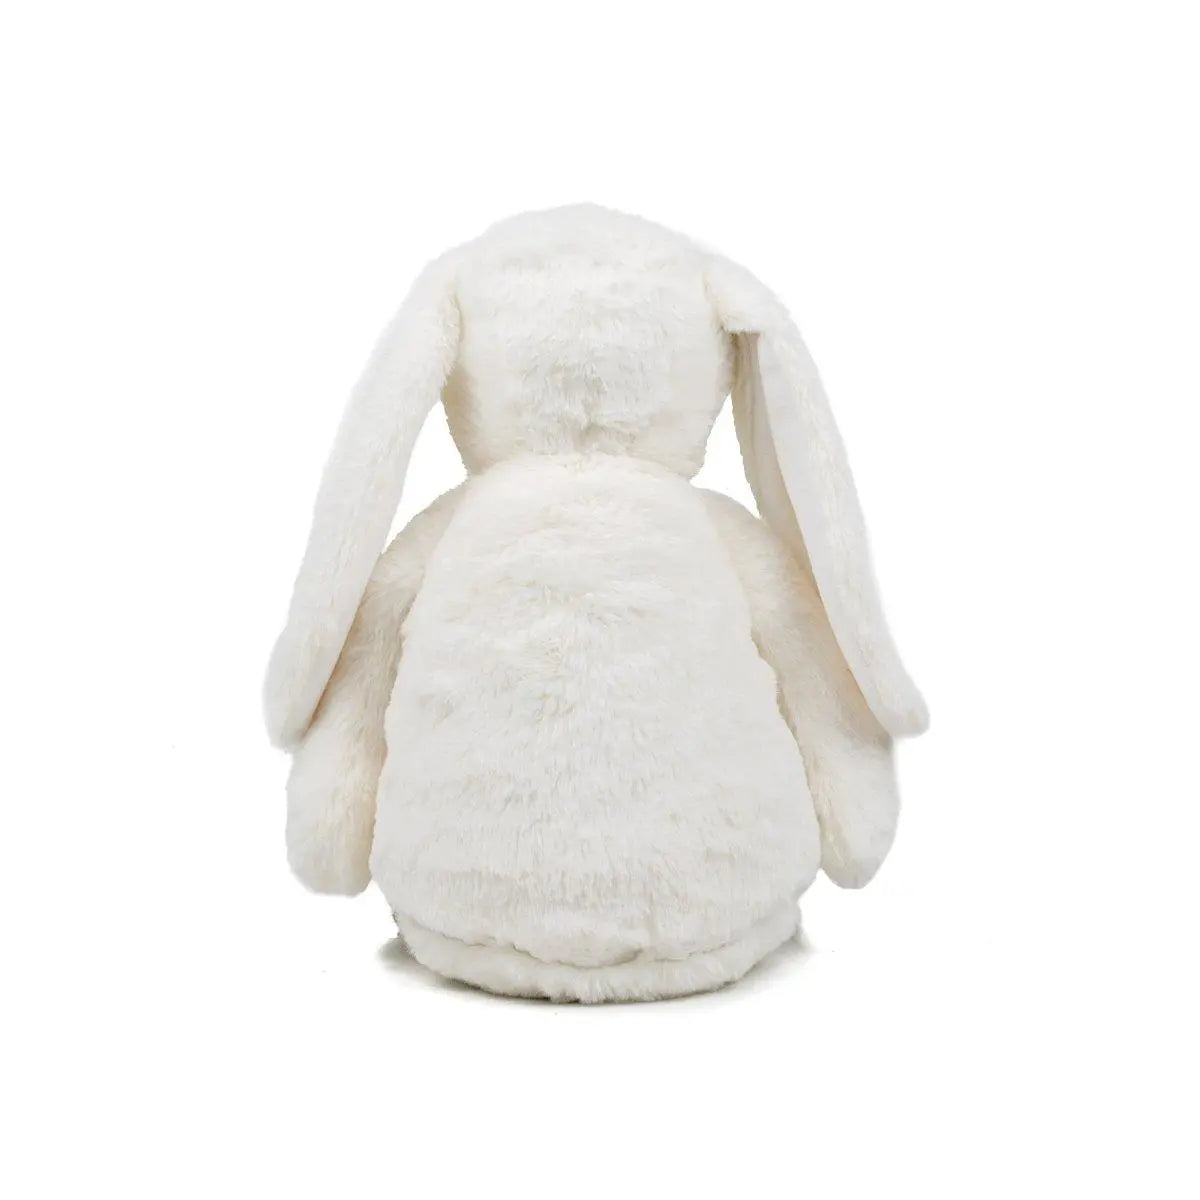 Personalised Bunny Rabbit, Large Soft Toy, White Bunny Teddy, New Baby Gift, Baby Boy Gift, Bunny Soft Toy, Cuddly Toy, Easter Baby Gift